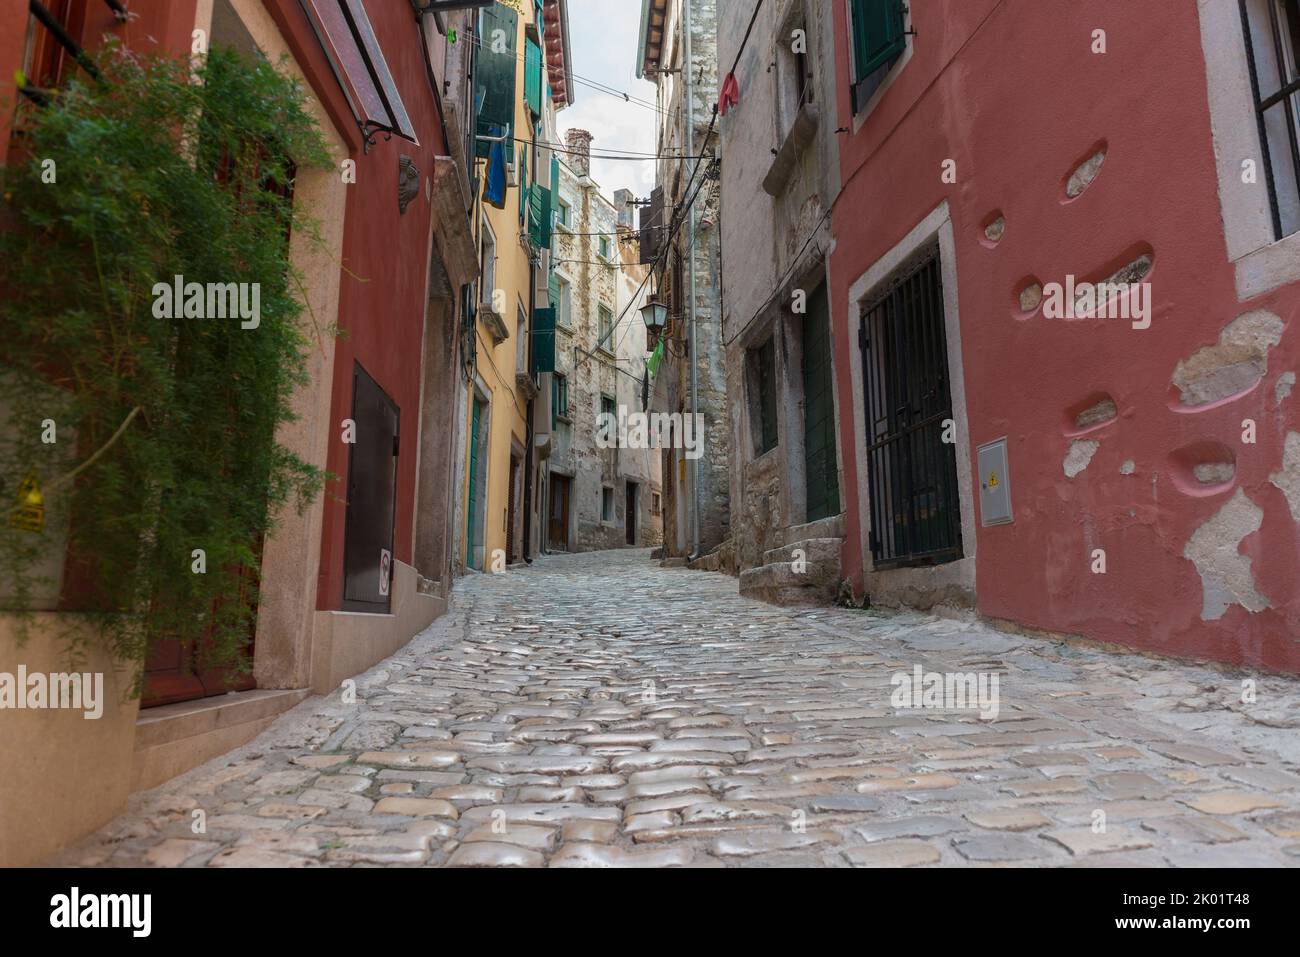 View into a picturesque street in the historic town Rovinj, Croatia, Europe. Stock Photo